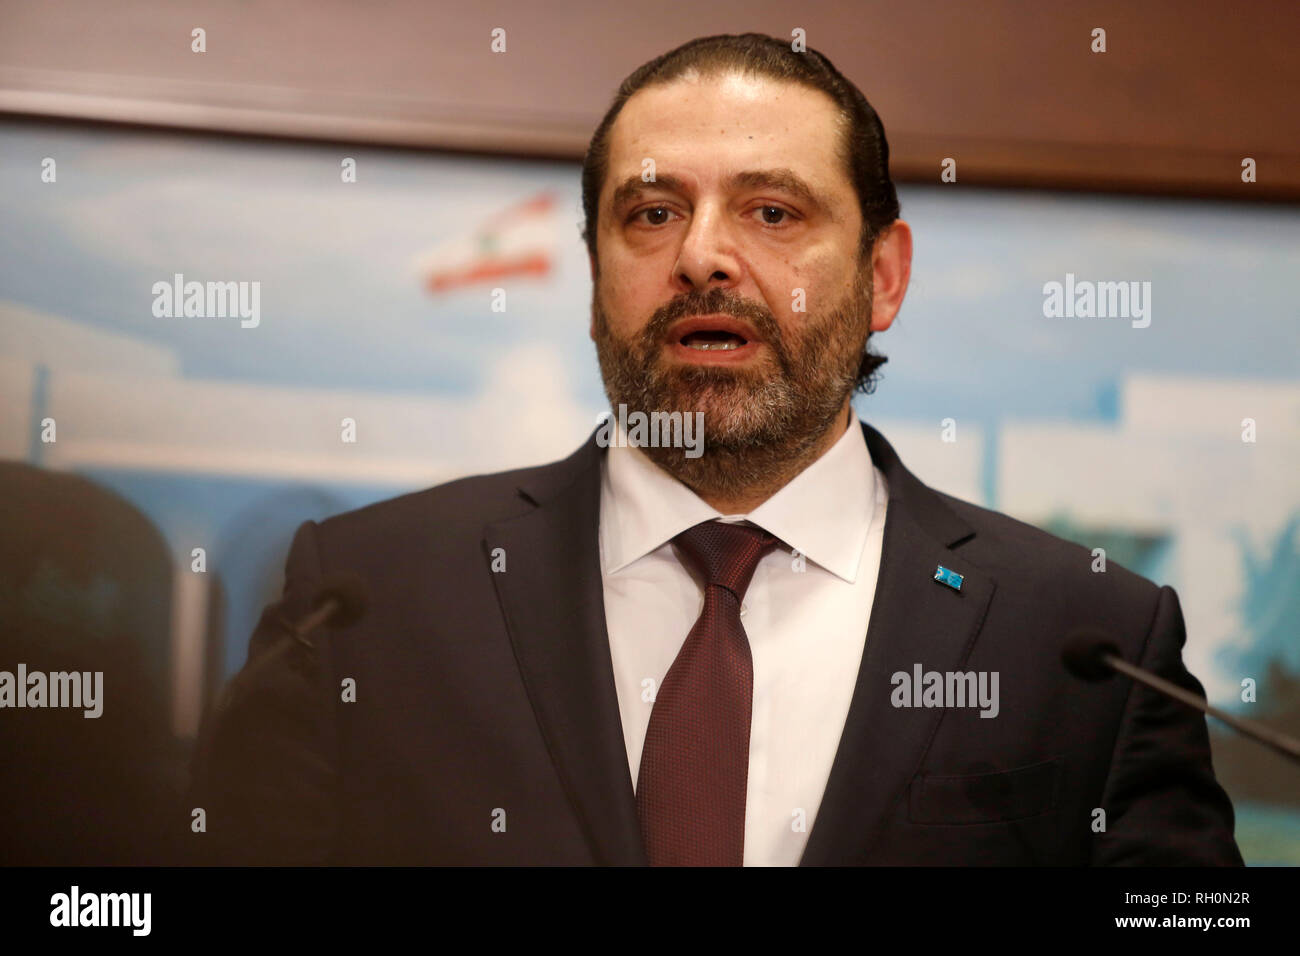 Beirut, Lebanon. 31st Jan, 2019. Lebanese Prime Minister Saad Hariri speaks at a press conference in Beirut, Lebanon, Jan. 31, 2019. Lebanon announced Thursday the formation of a new government, which is headed by Prime Minister Saad Hariri, breaking a nine-month political deadlock in the country, local TV Channel LBCI reported. Credit: Bilal Jawich/Xinhua/Alamy Live News Stock Photo